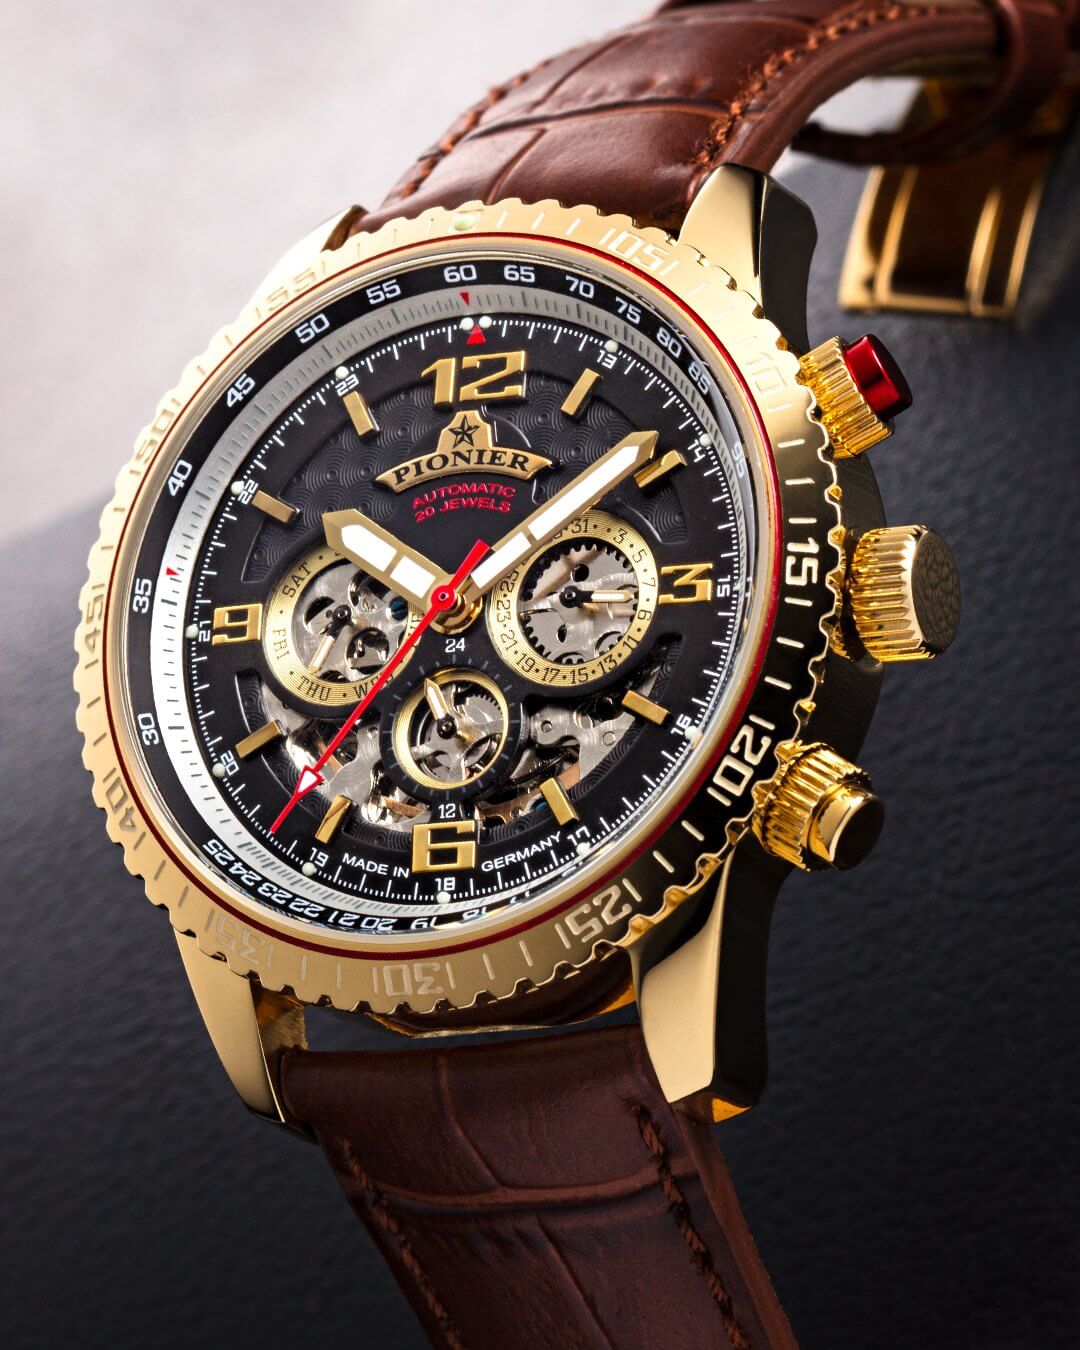 What To Know Before Buying Automatic Or Mechanical Watches?